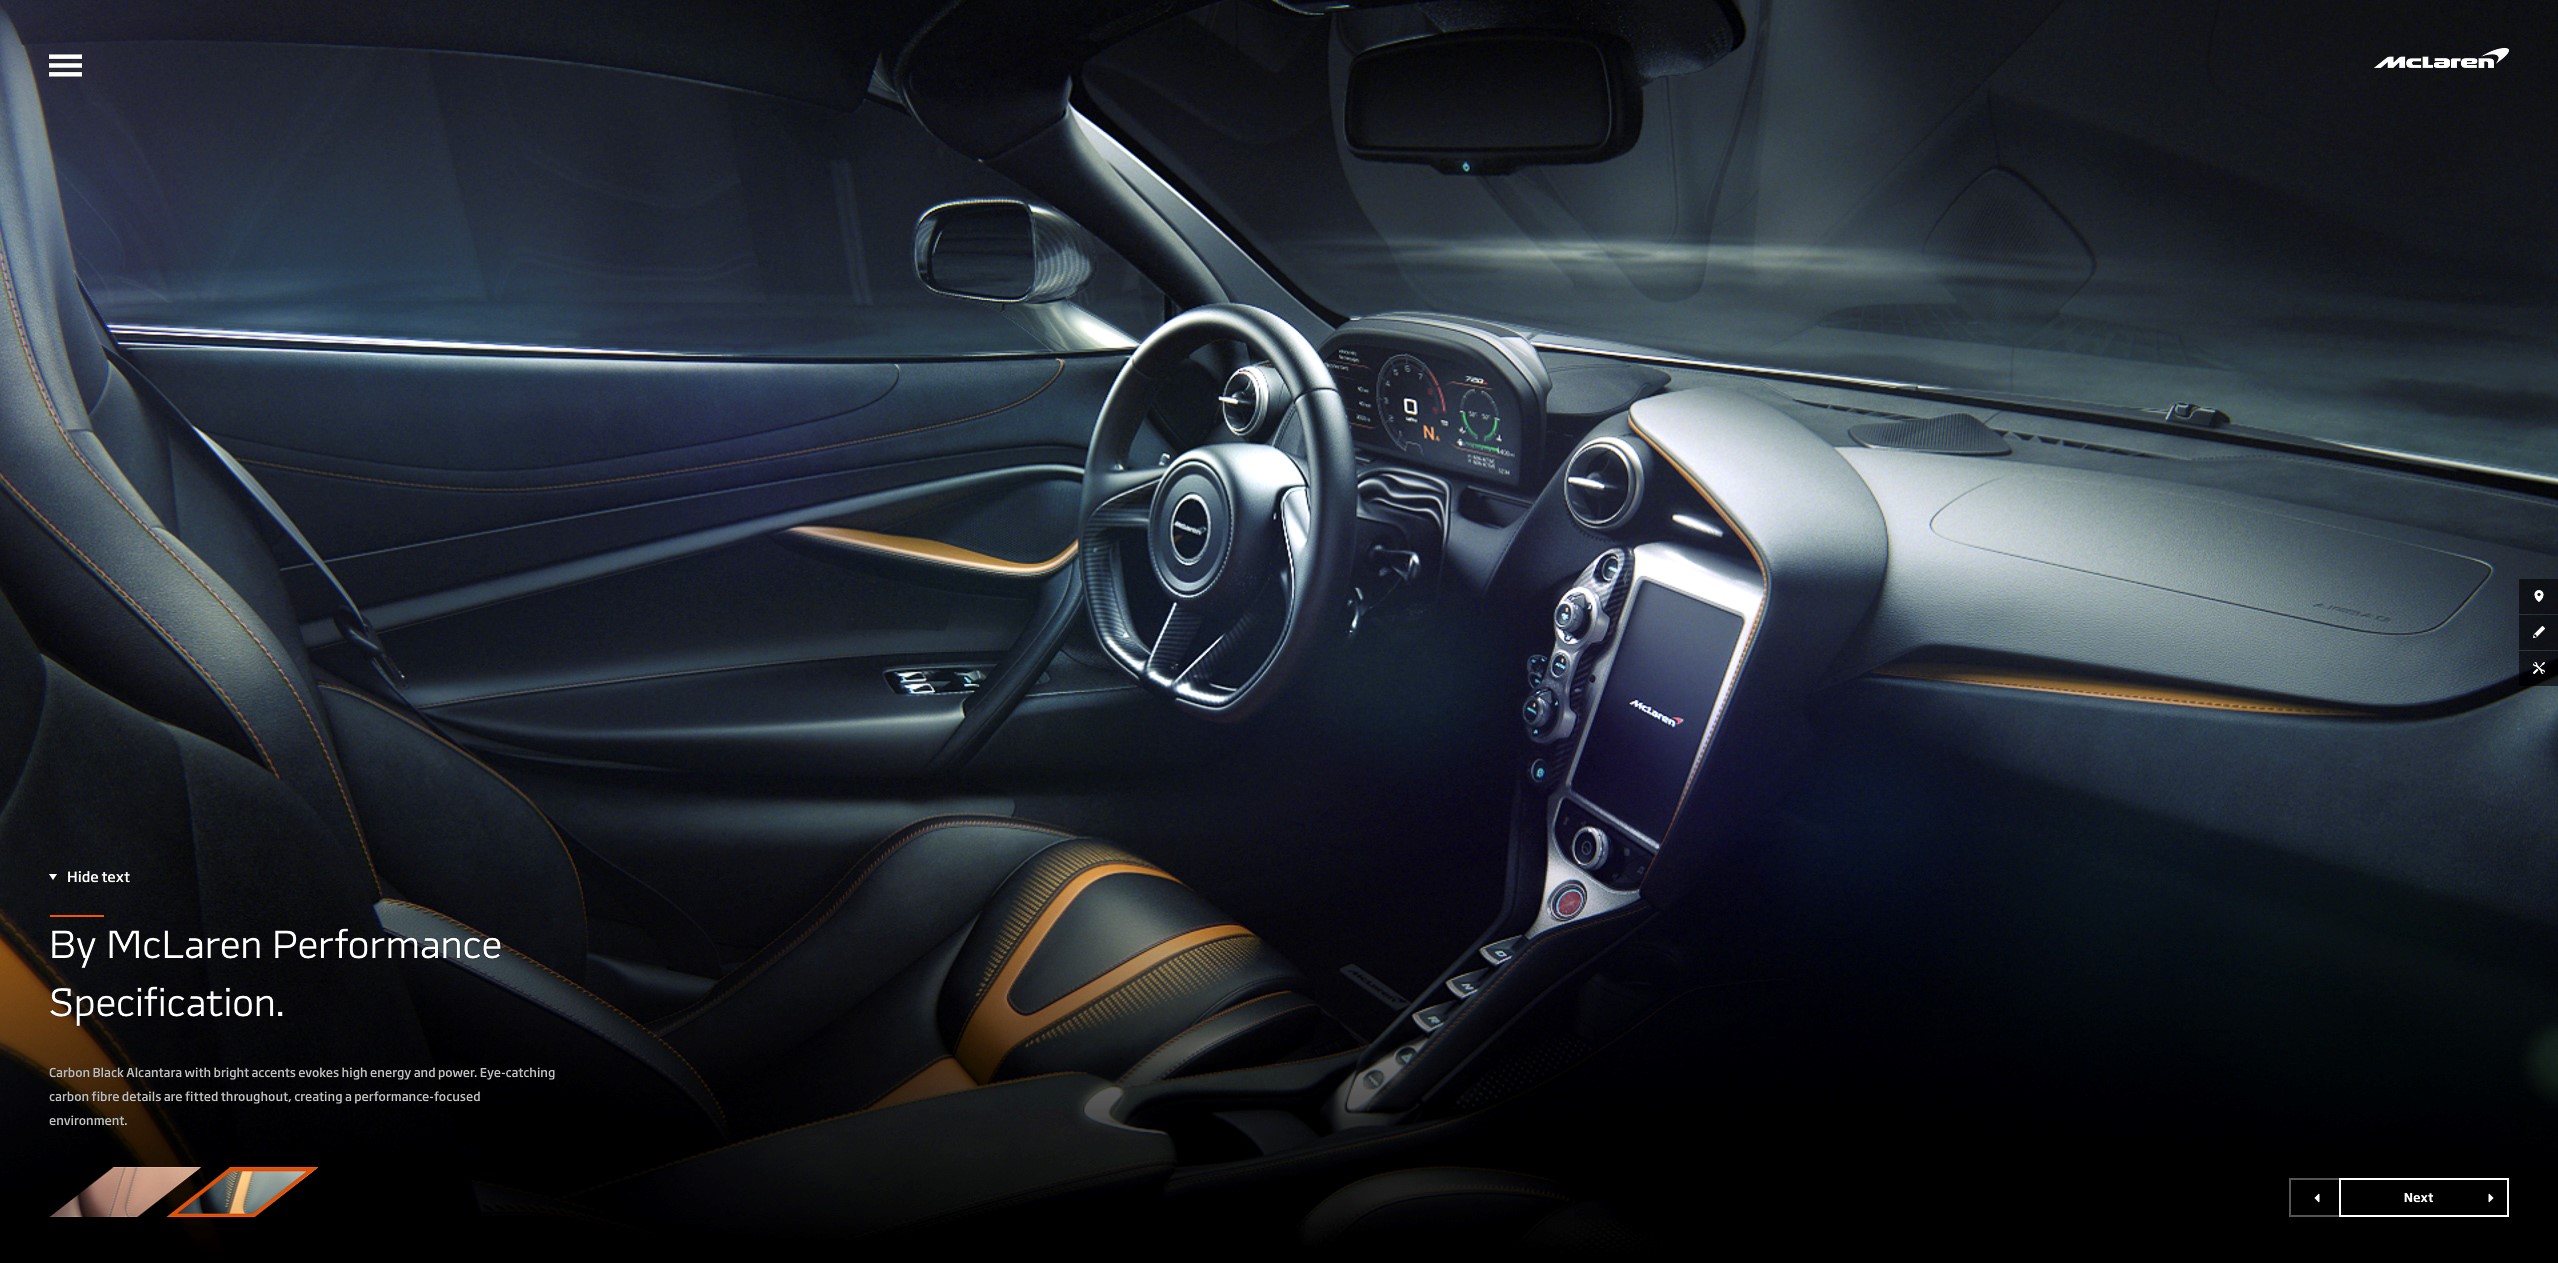 Choose the Perfect Model for You with McLaren’s Online Configurator